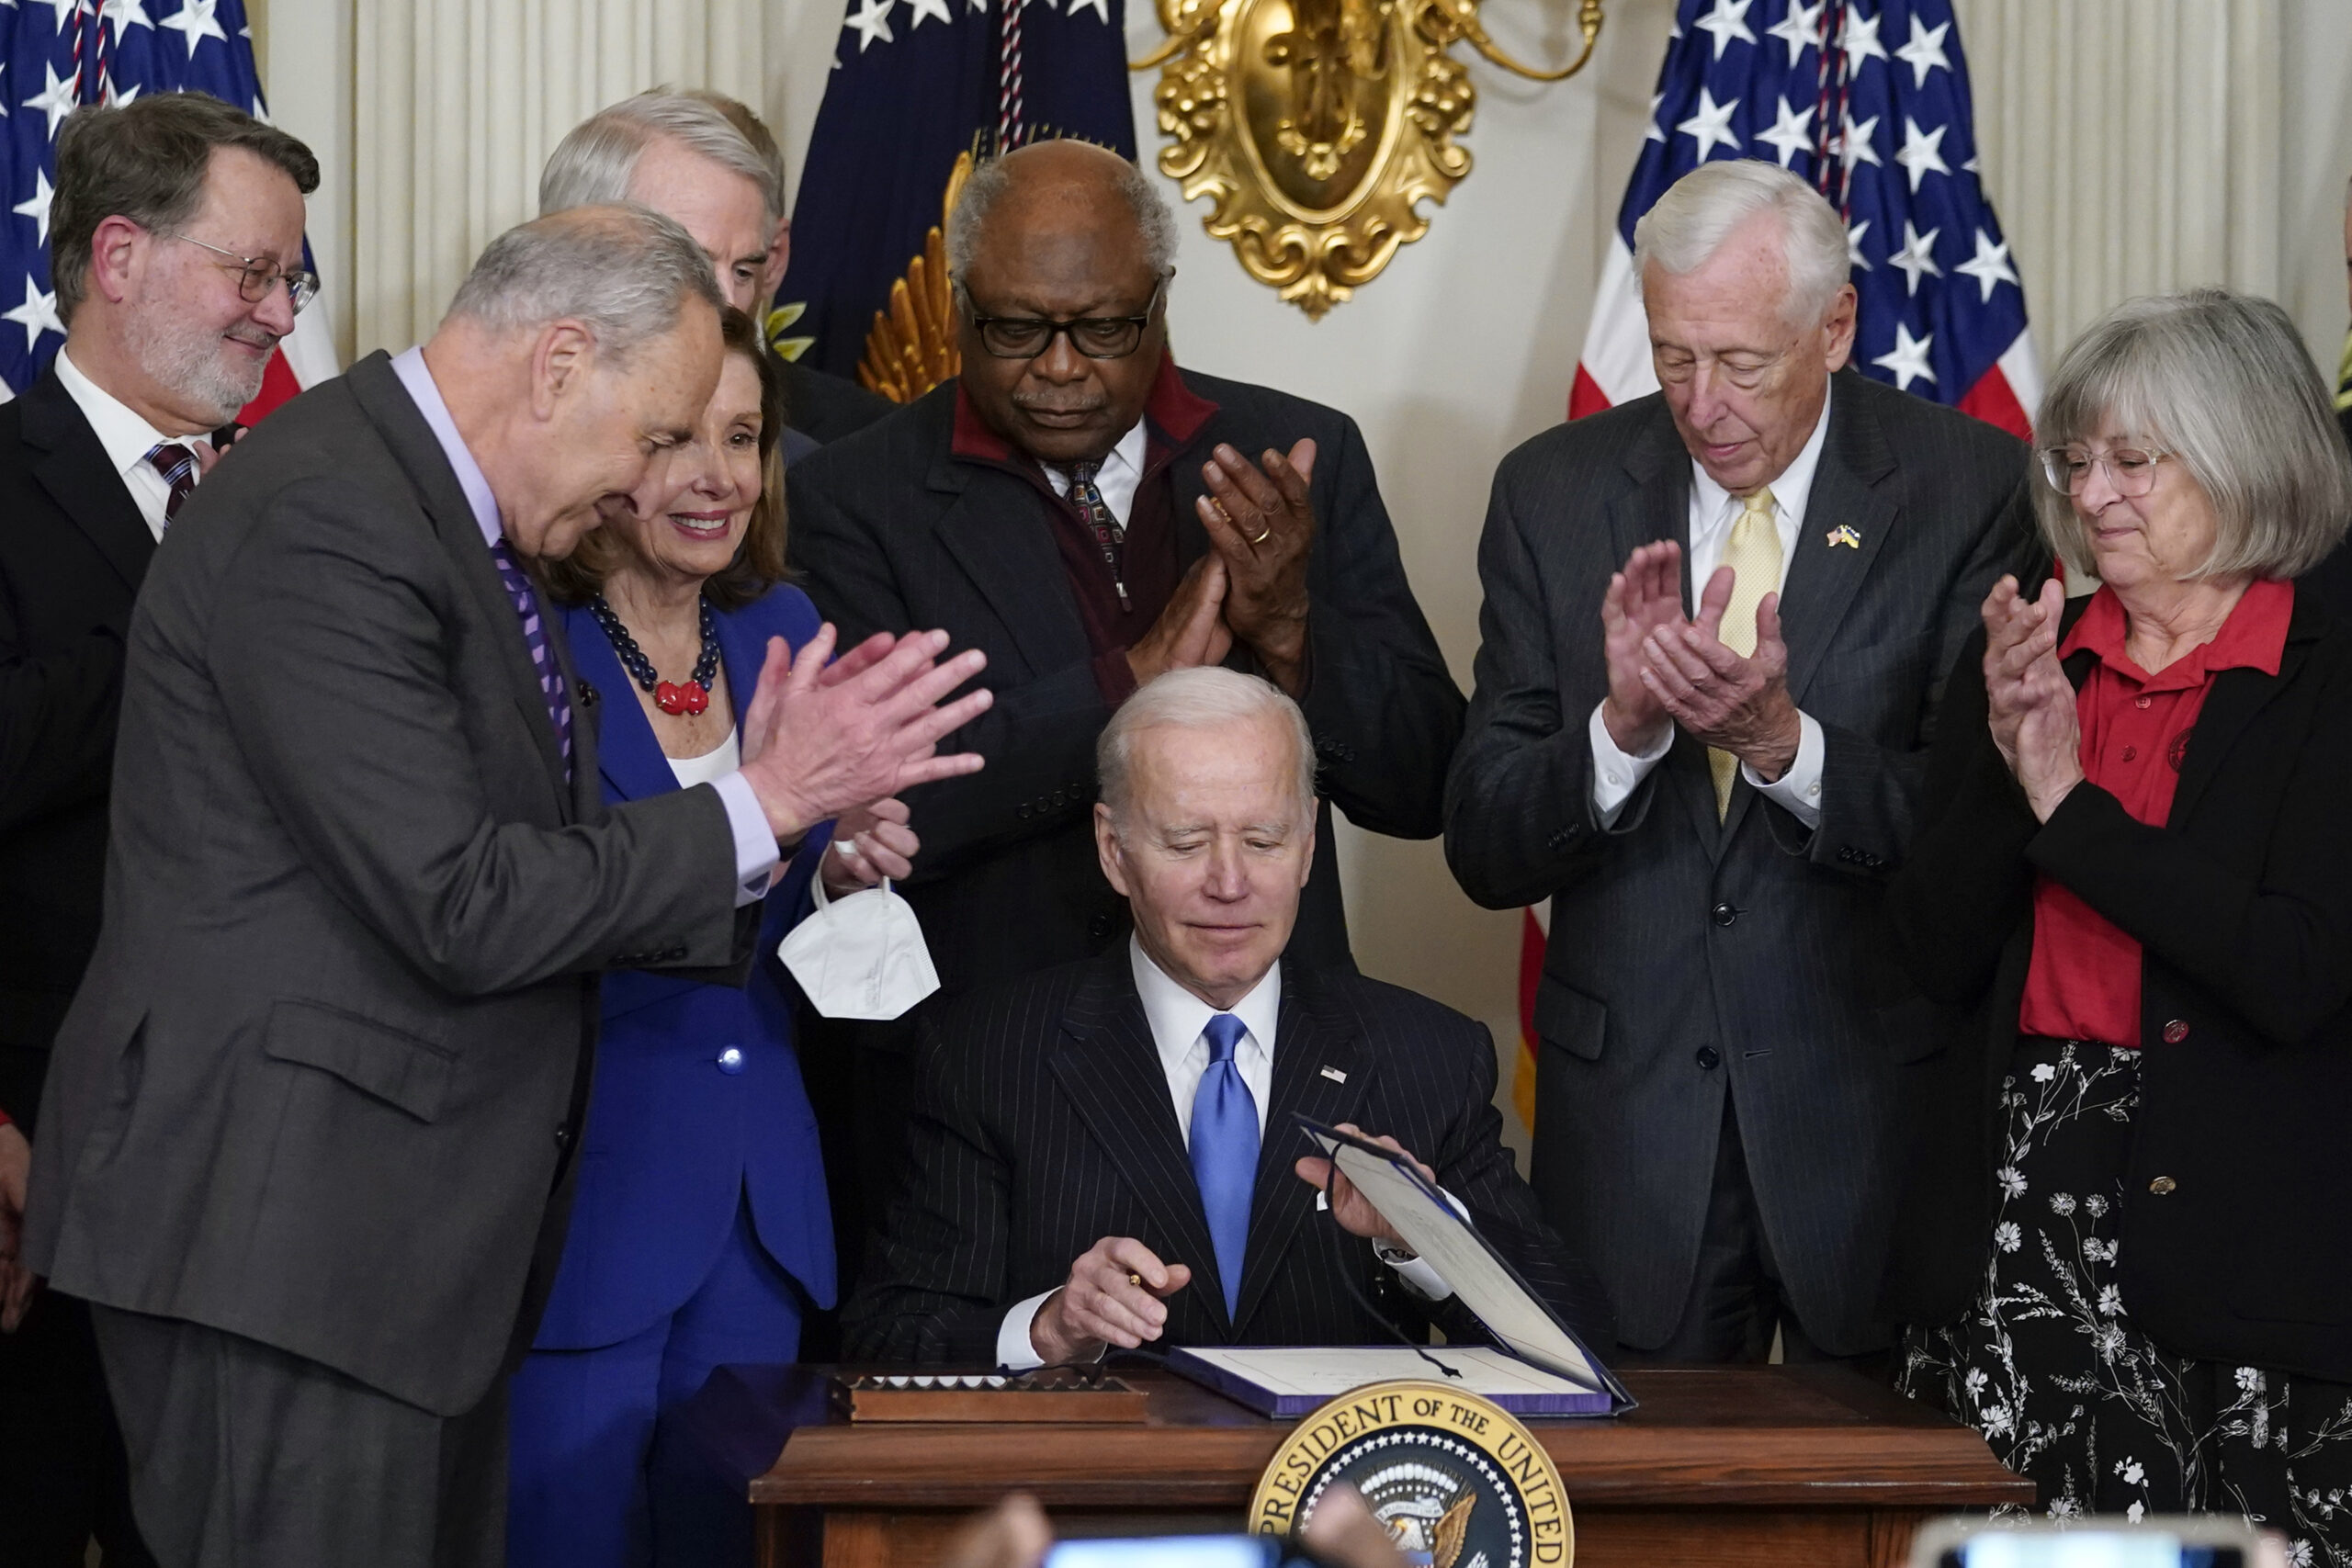 President Joe Biden signs the Postal Service Reform Act of 2022 in the State Dining Room at the White House in Washington, Wednesday, April 6, 2022. Watching from left are Sen. Gary Peters, D-Mich., Senate Majority Leader Chuck Schumer of N.Y., Sen. Rob Portman, R-Ohio, House Speaker Nancy Pelosi of Calif., Rep. James Clyburn, D-S.C., Rep. Steny Hoyer, D-Md., and Annette Taylor. (AP Photo/Susan Walsh)